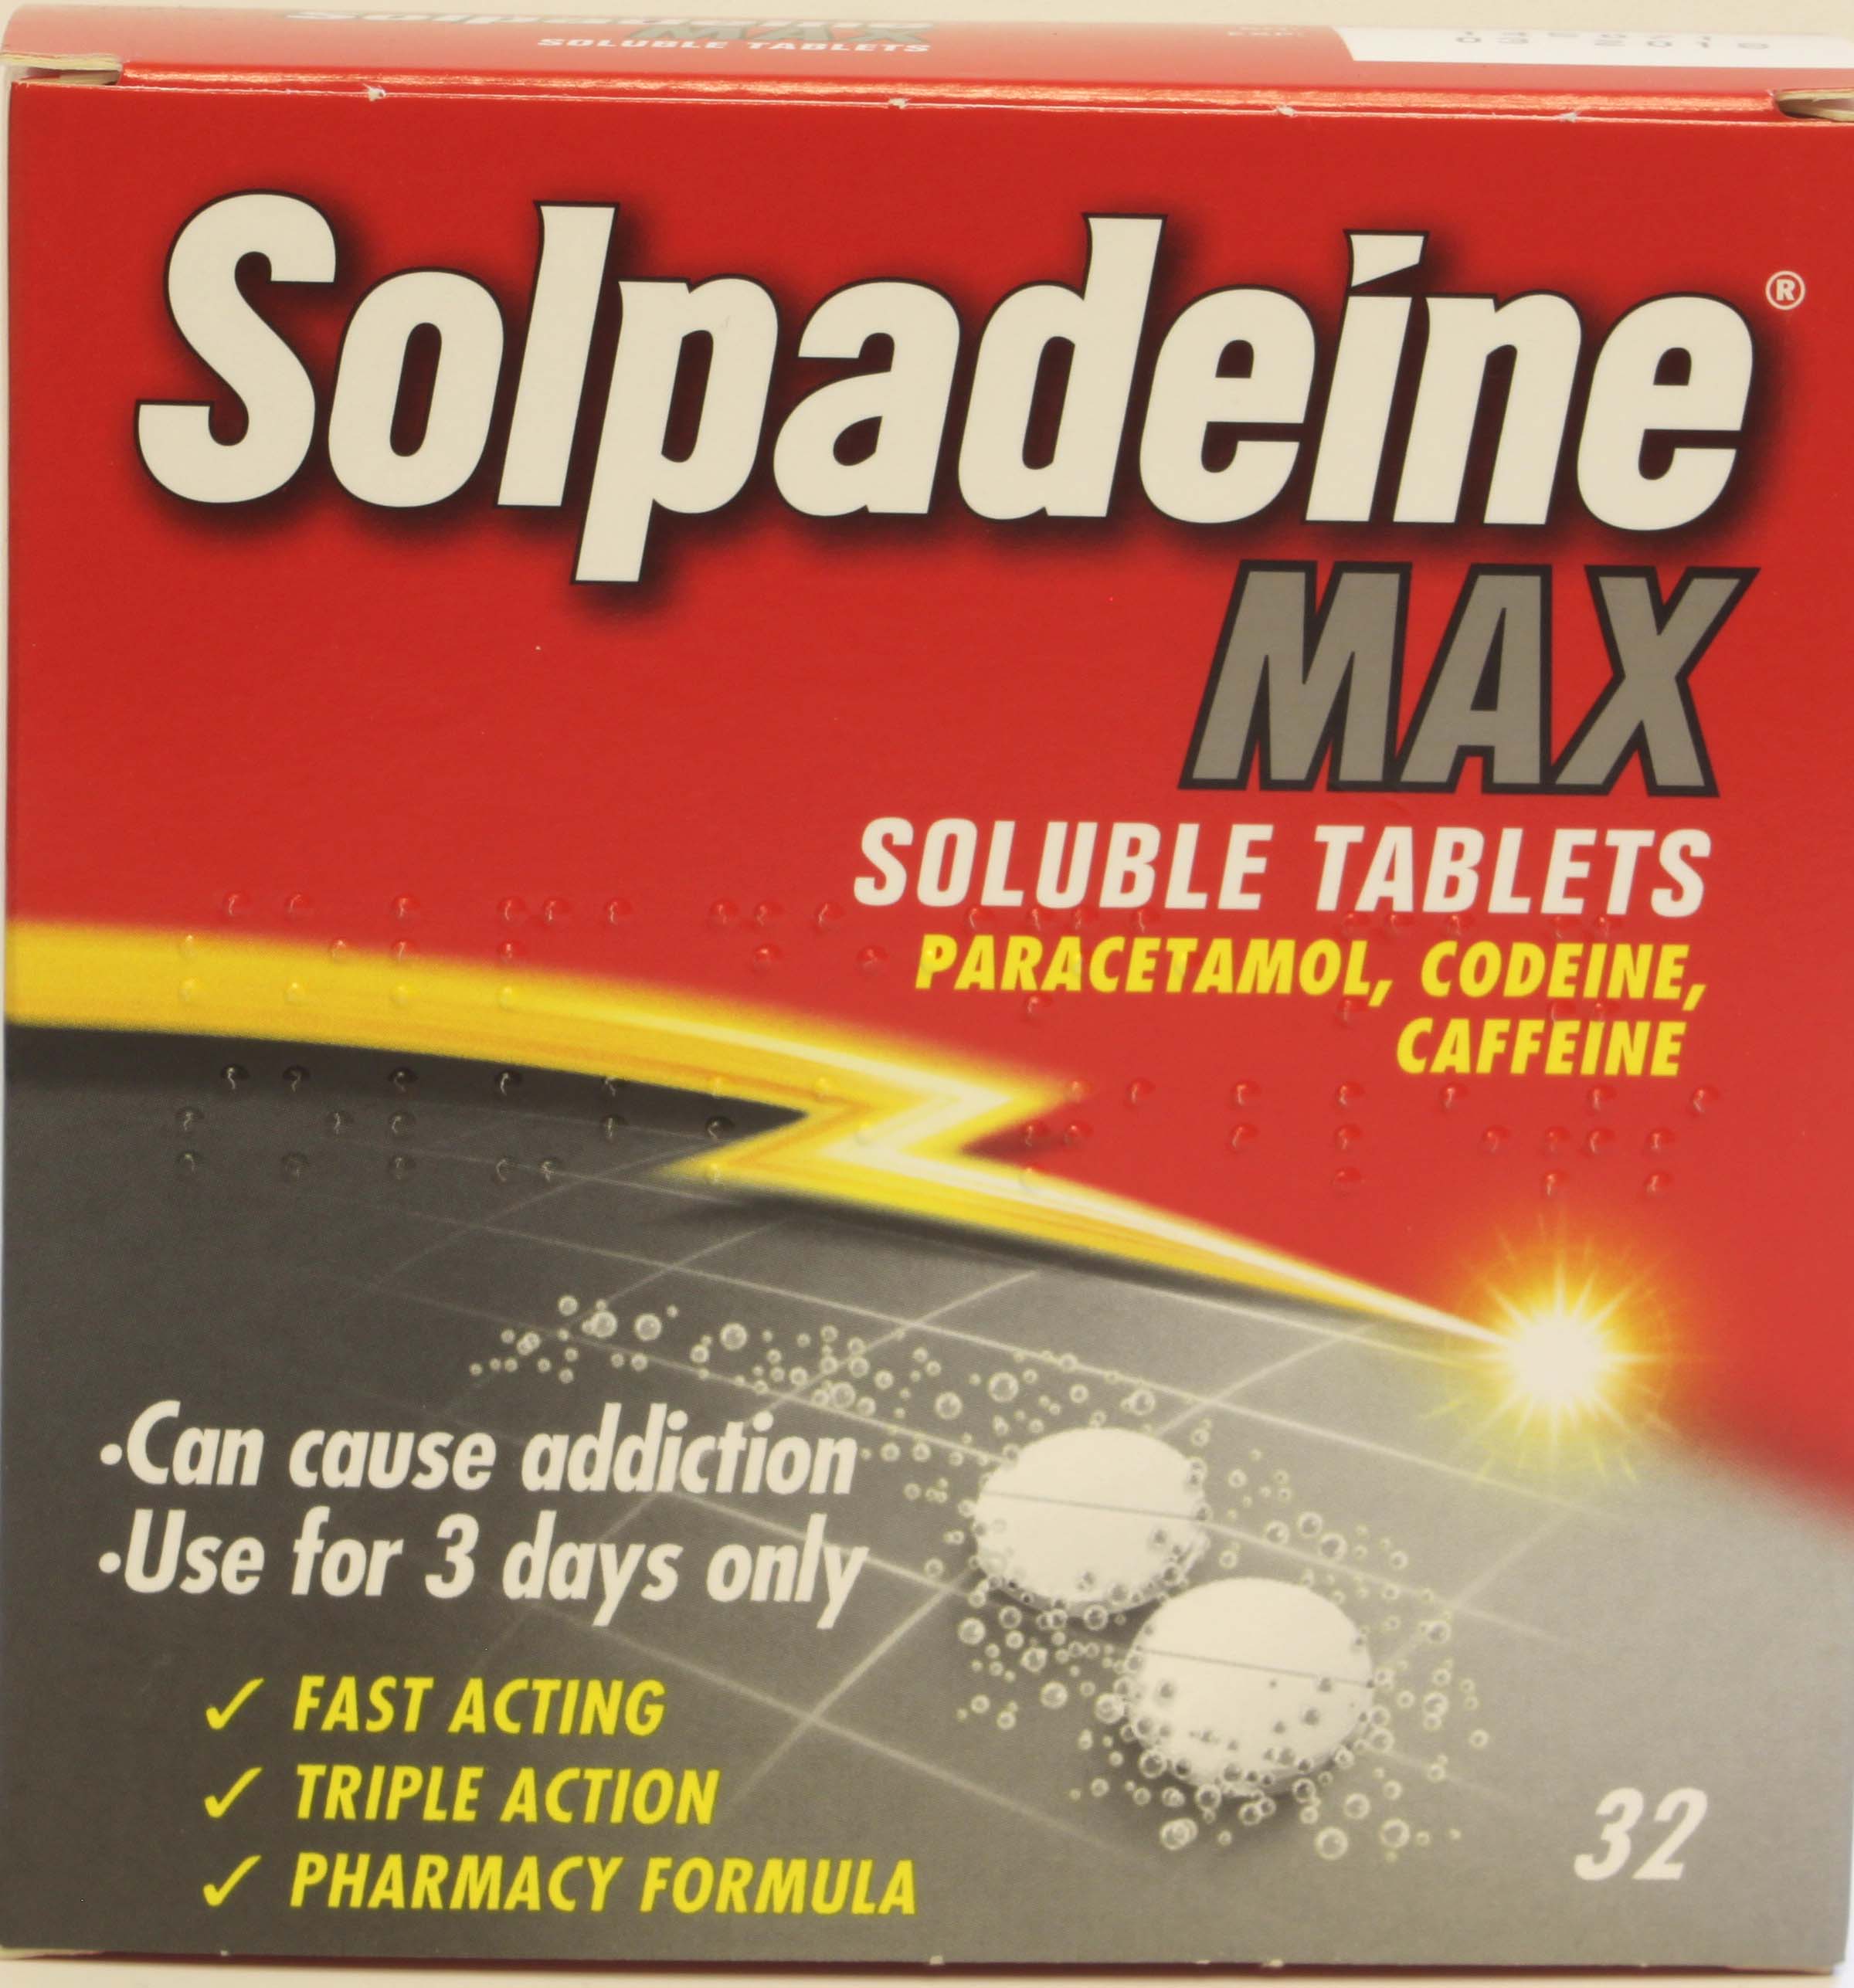 Pack of 32 Solpadeine Max Soluble Tablets